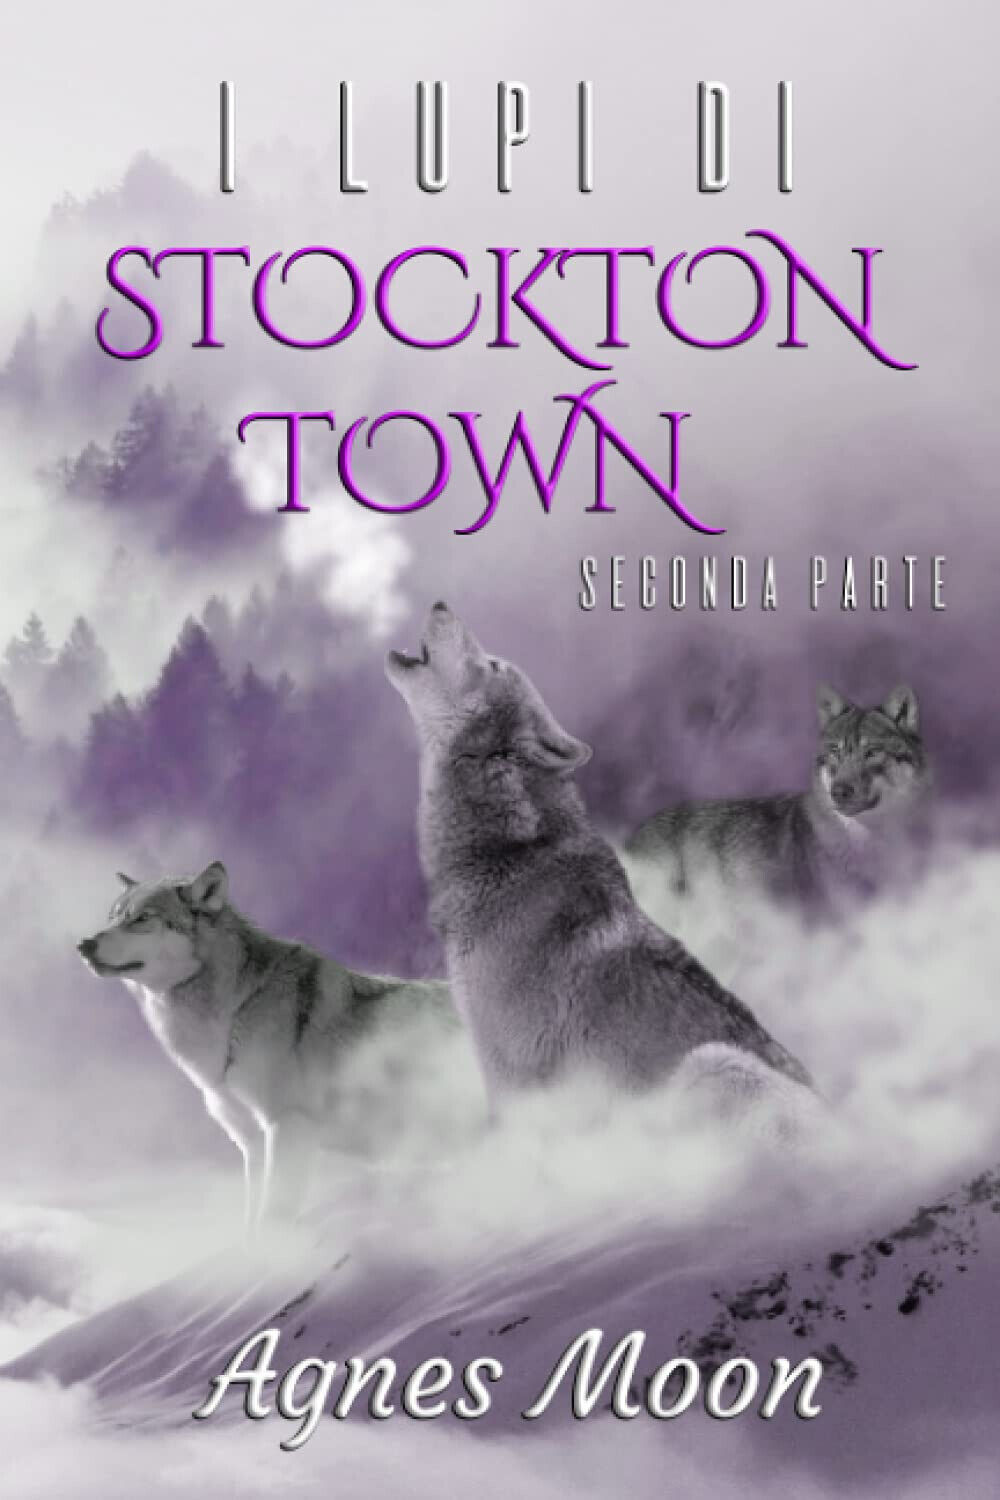 I lupi di Stockton Town - Agnes Moon - Independently published, 2021